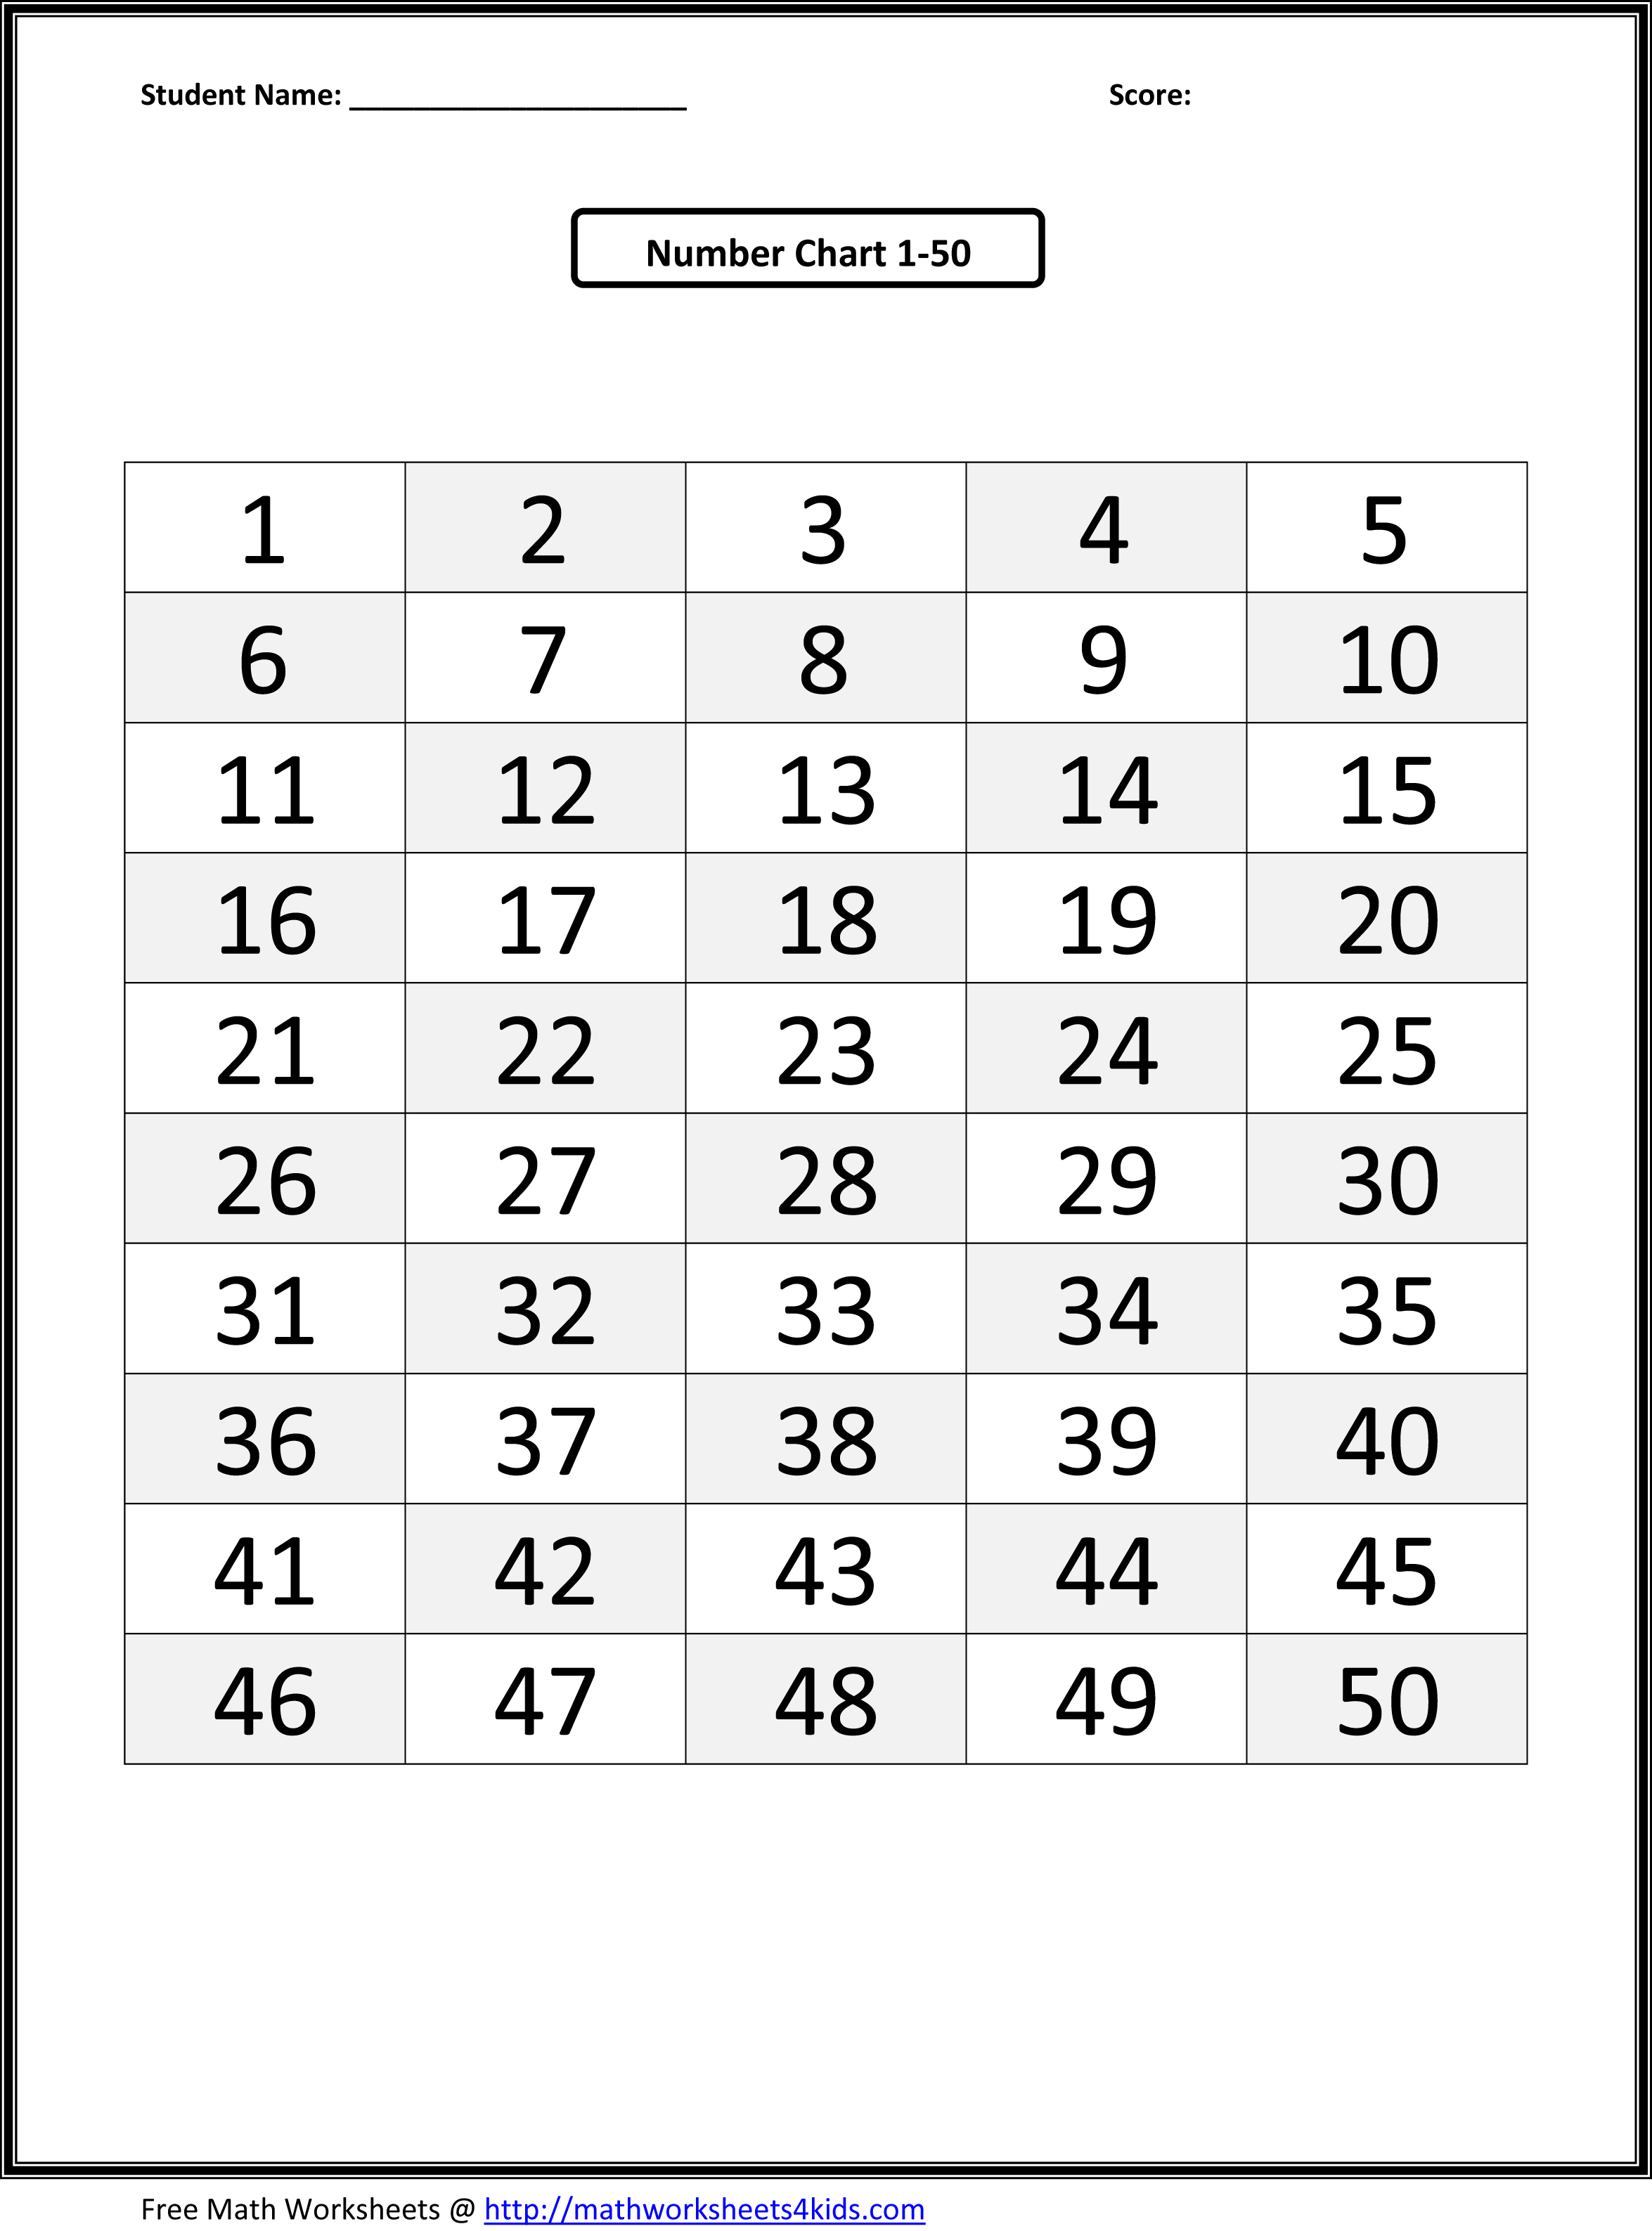 7 Best Images of Number Sheets 1 To 50 Printable Printable Number 1